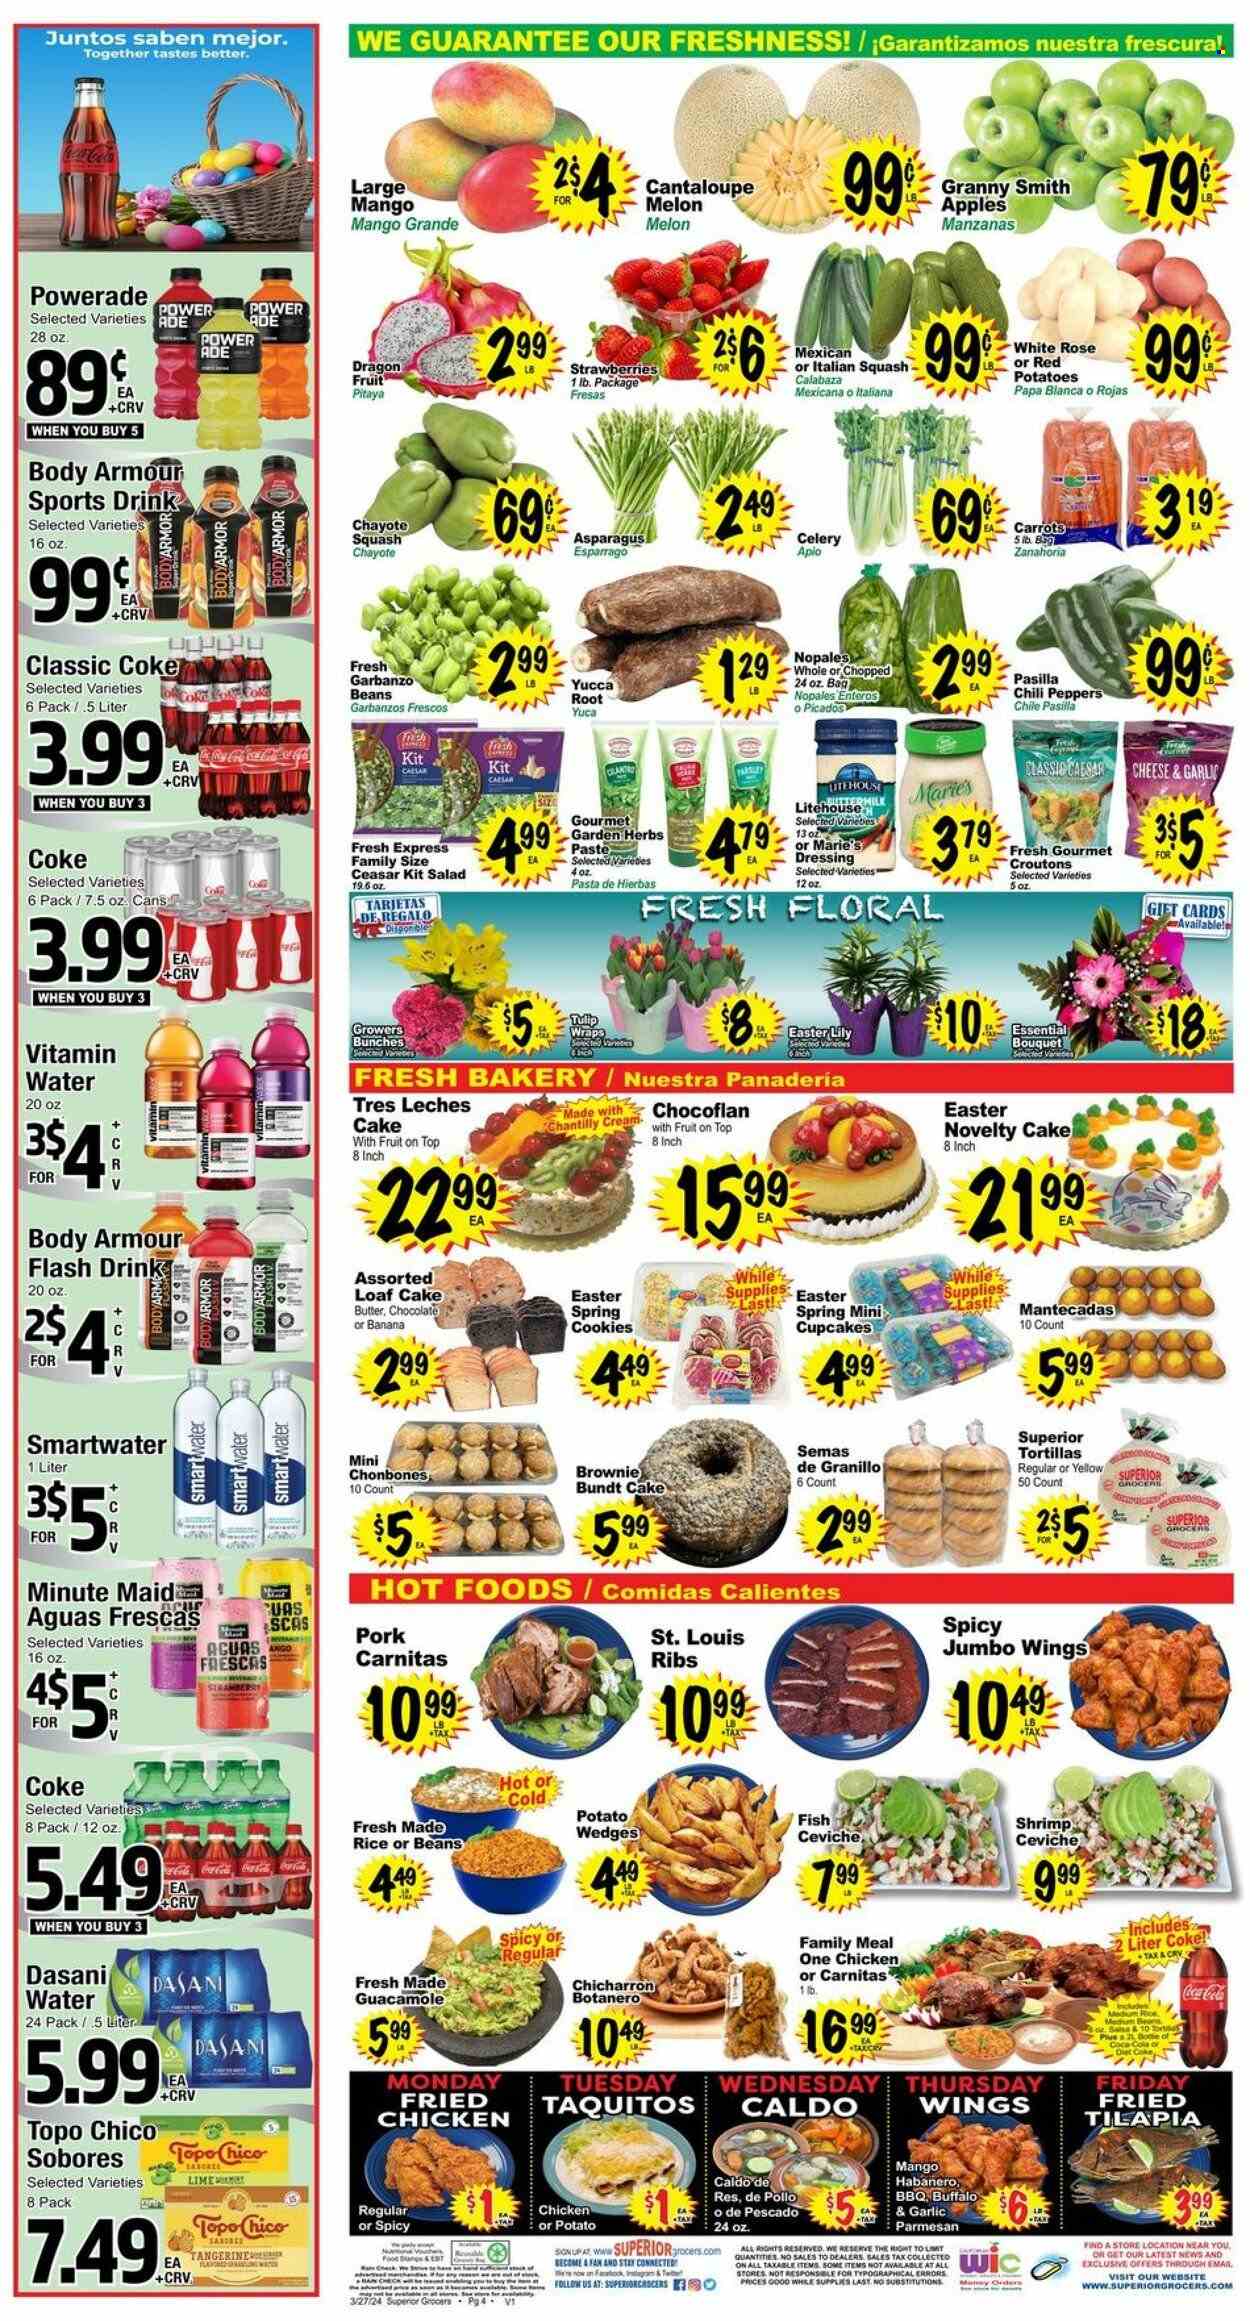 Superior Grocers ad  - 03.27.2024 - 04.02.2024.